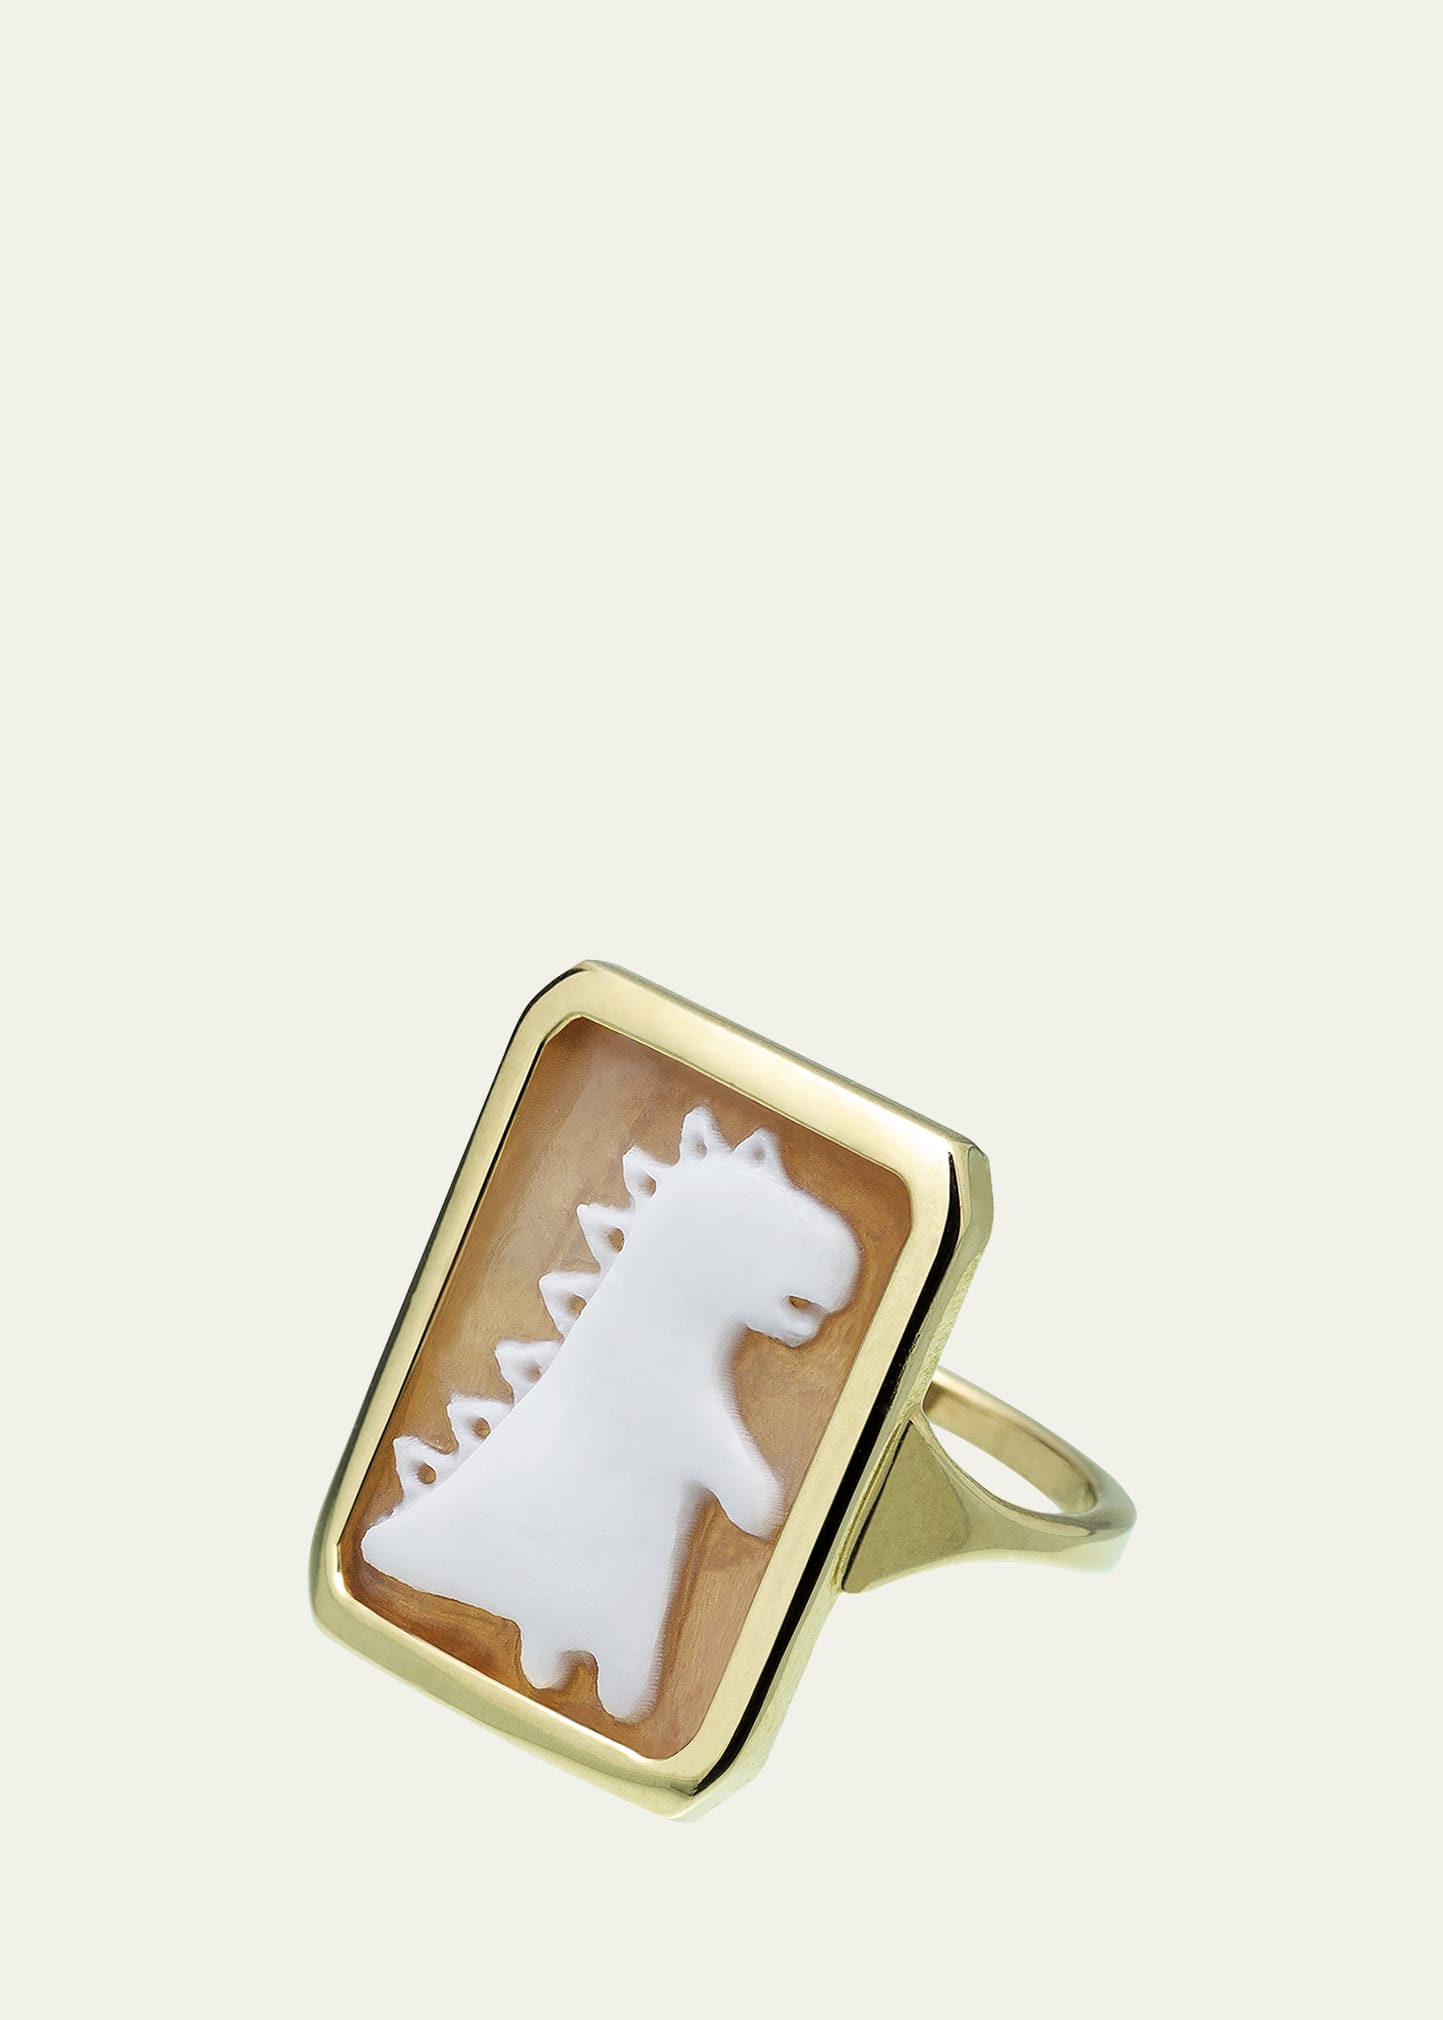 Aliita Cameo Dinosaur Ring in 9k Gold, Size 6 and 7.25